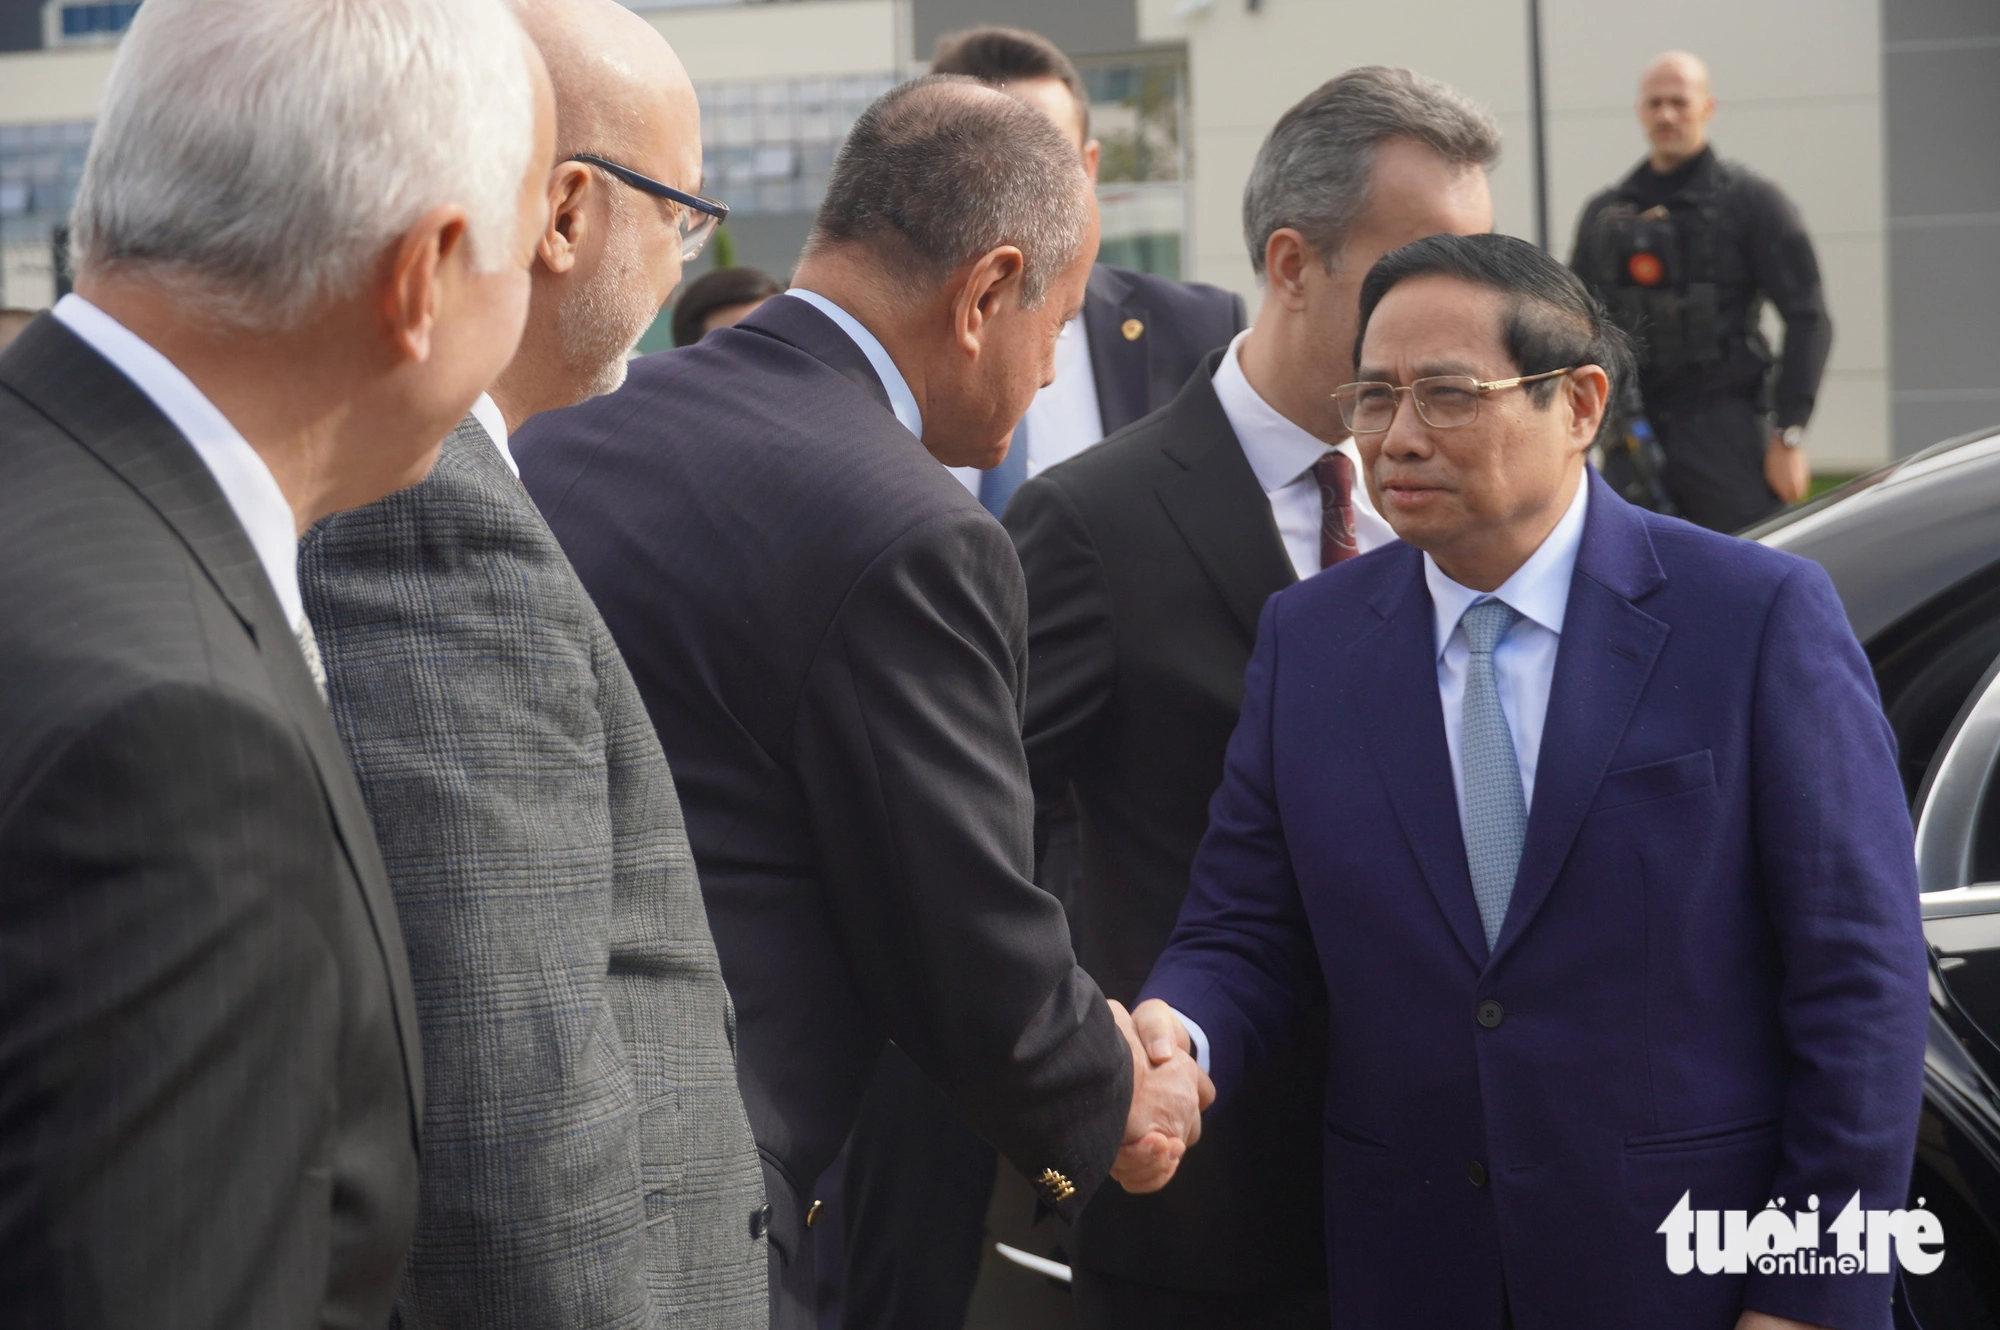 Vietnamese prime minister hints at defense cooperation during visit to Turkish Aerospace Industries